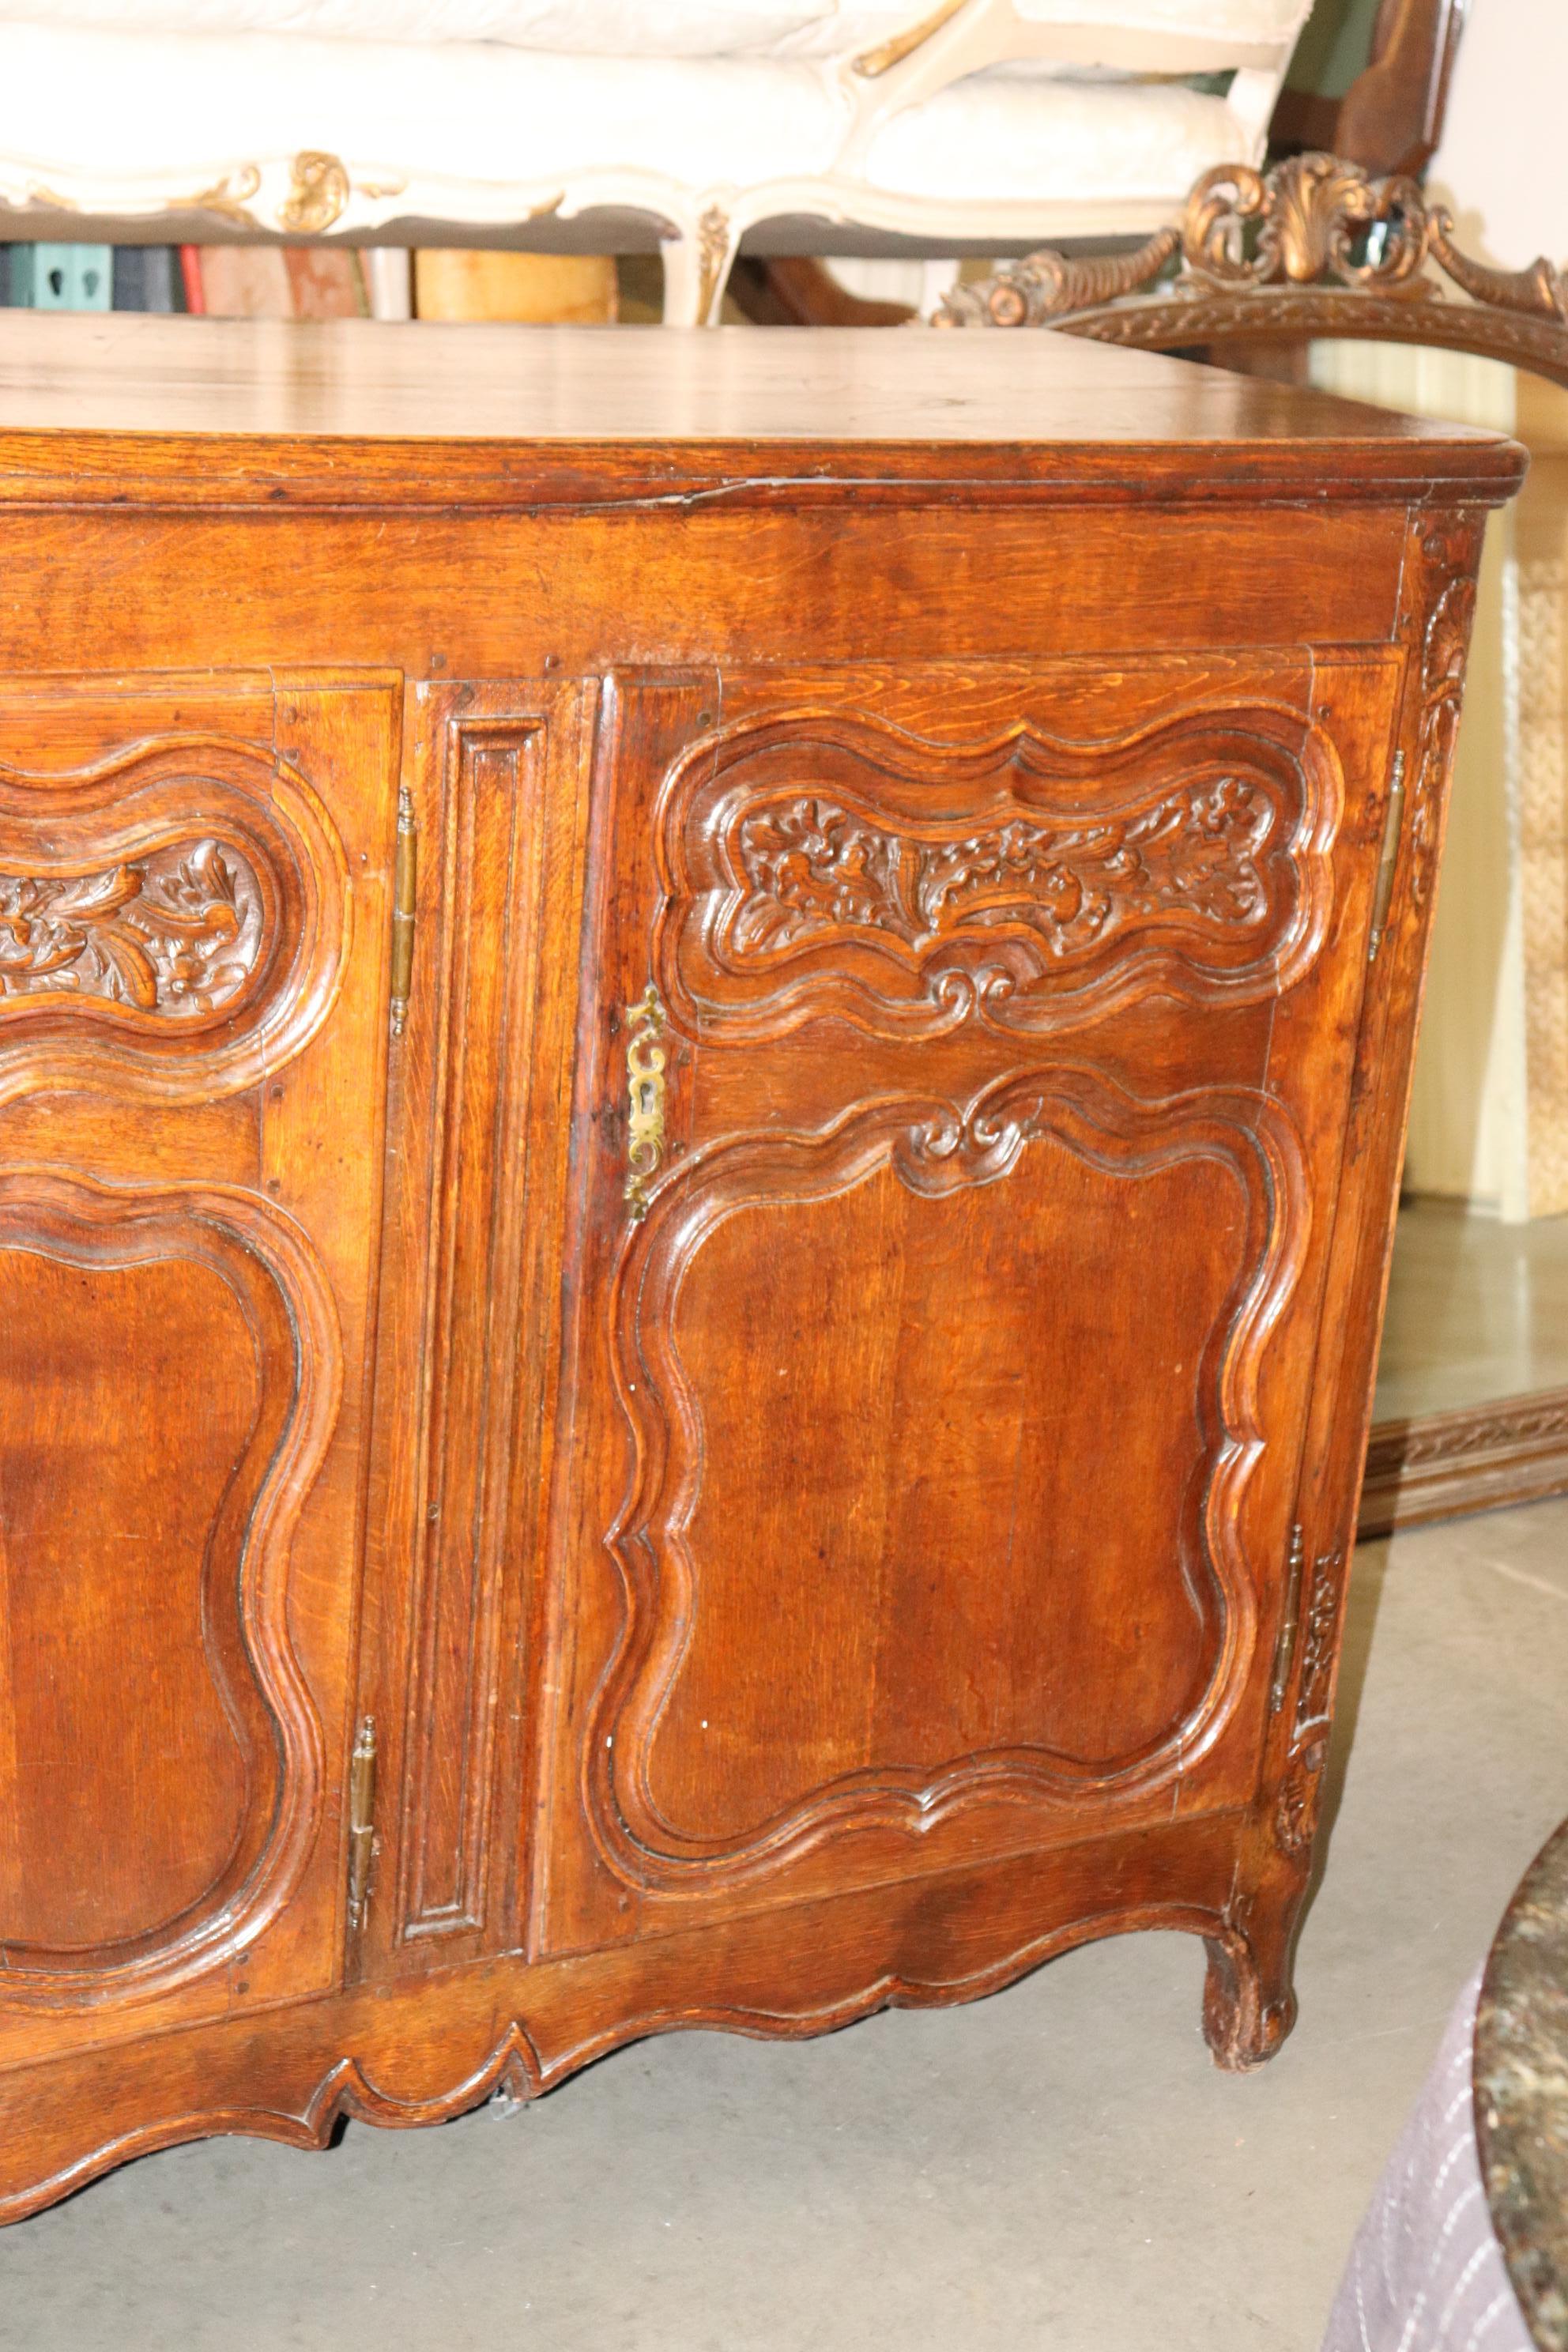 French Provincial Antique 1770s Era Country French Solid Walnut Carved Sideboard Buffet For Sale